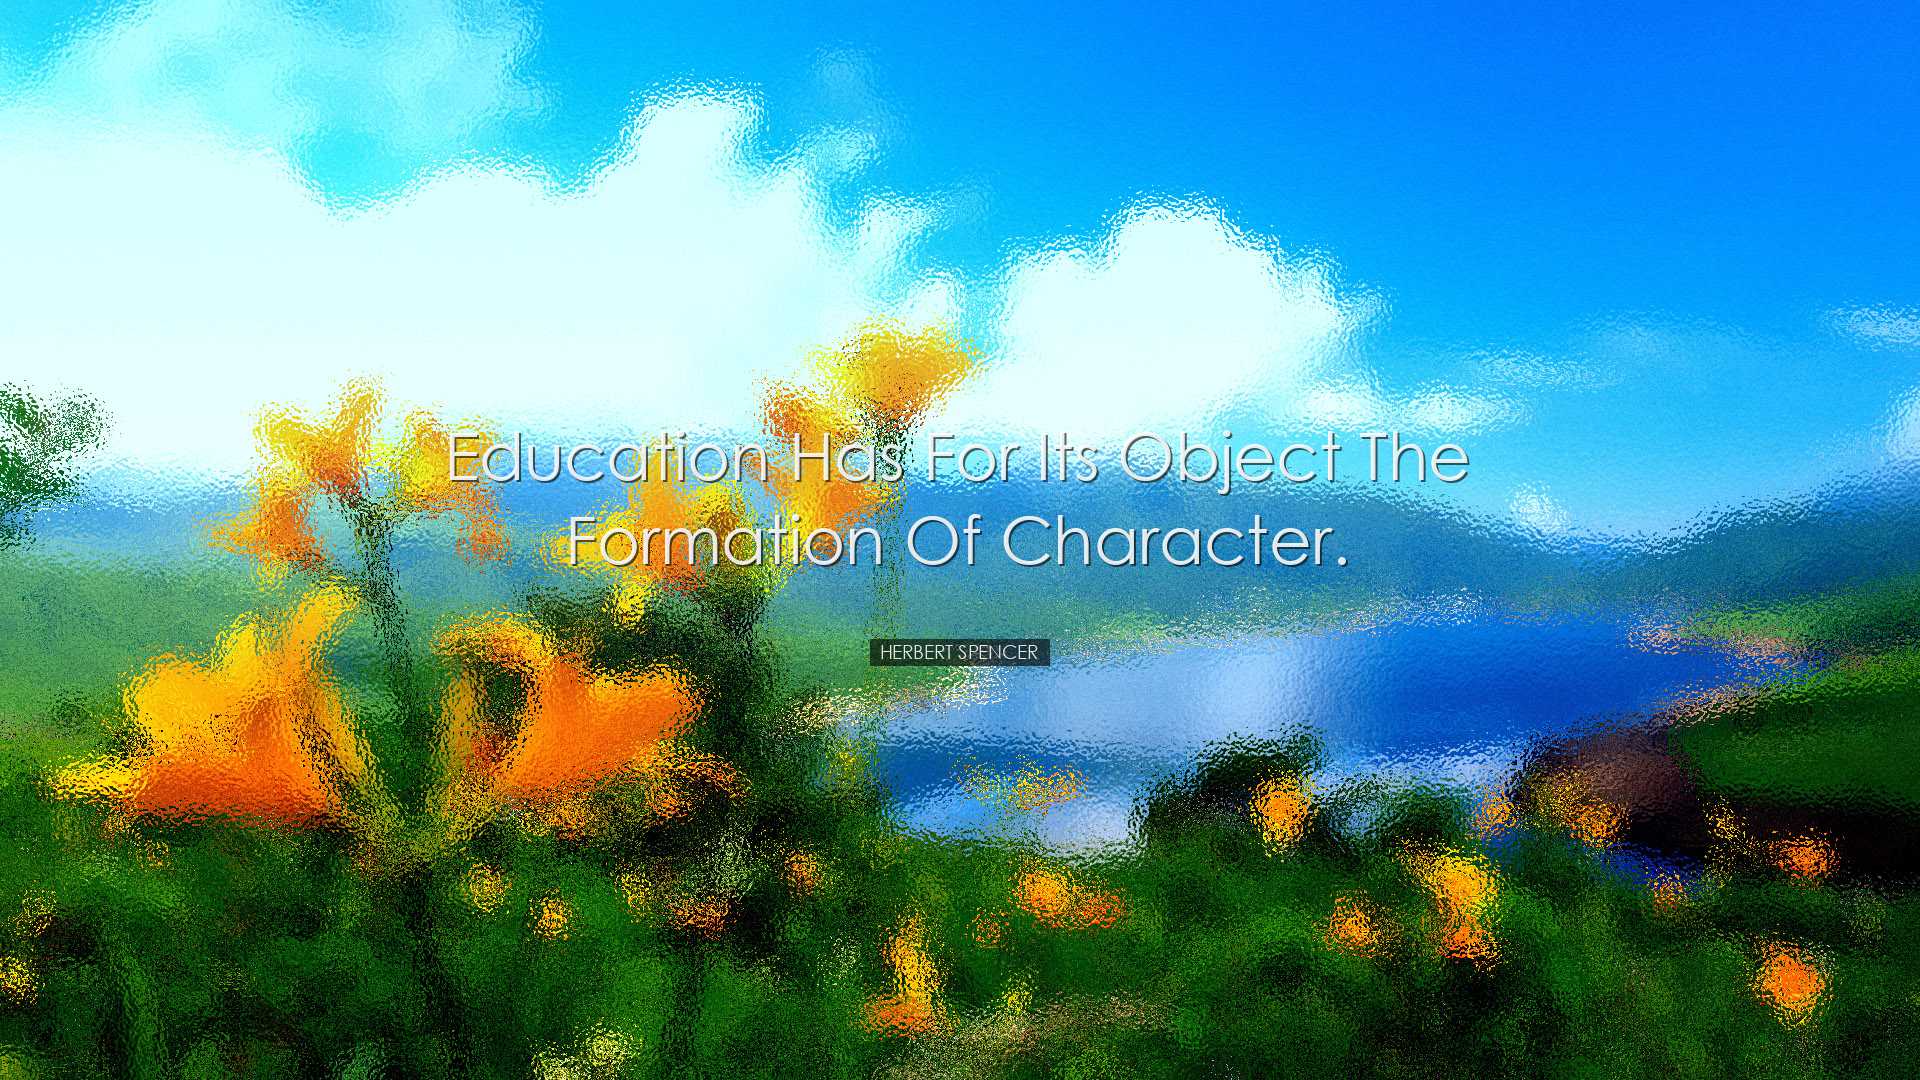 Education has for its object the formation of character. - Herbert